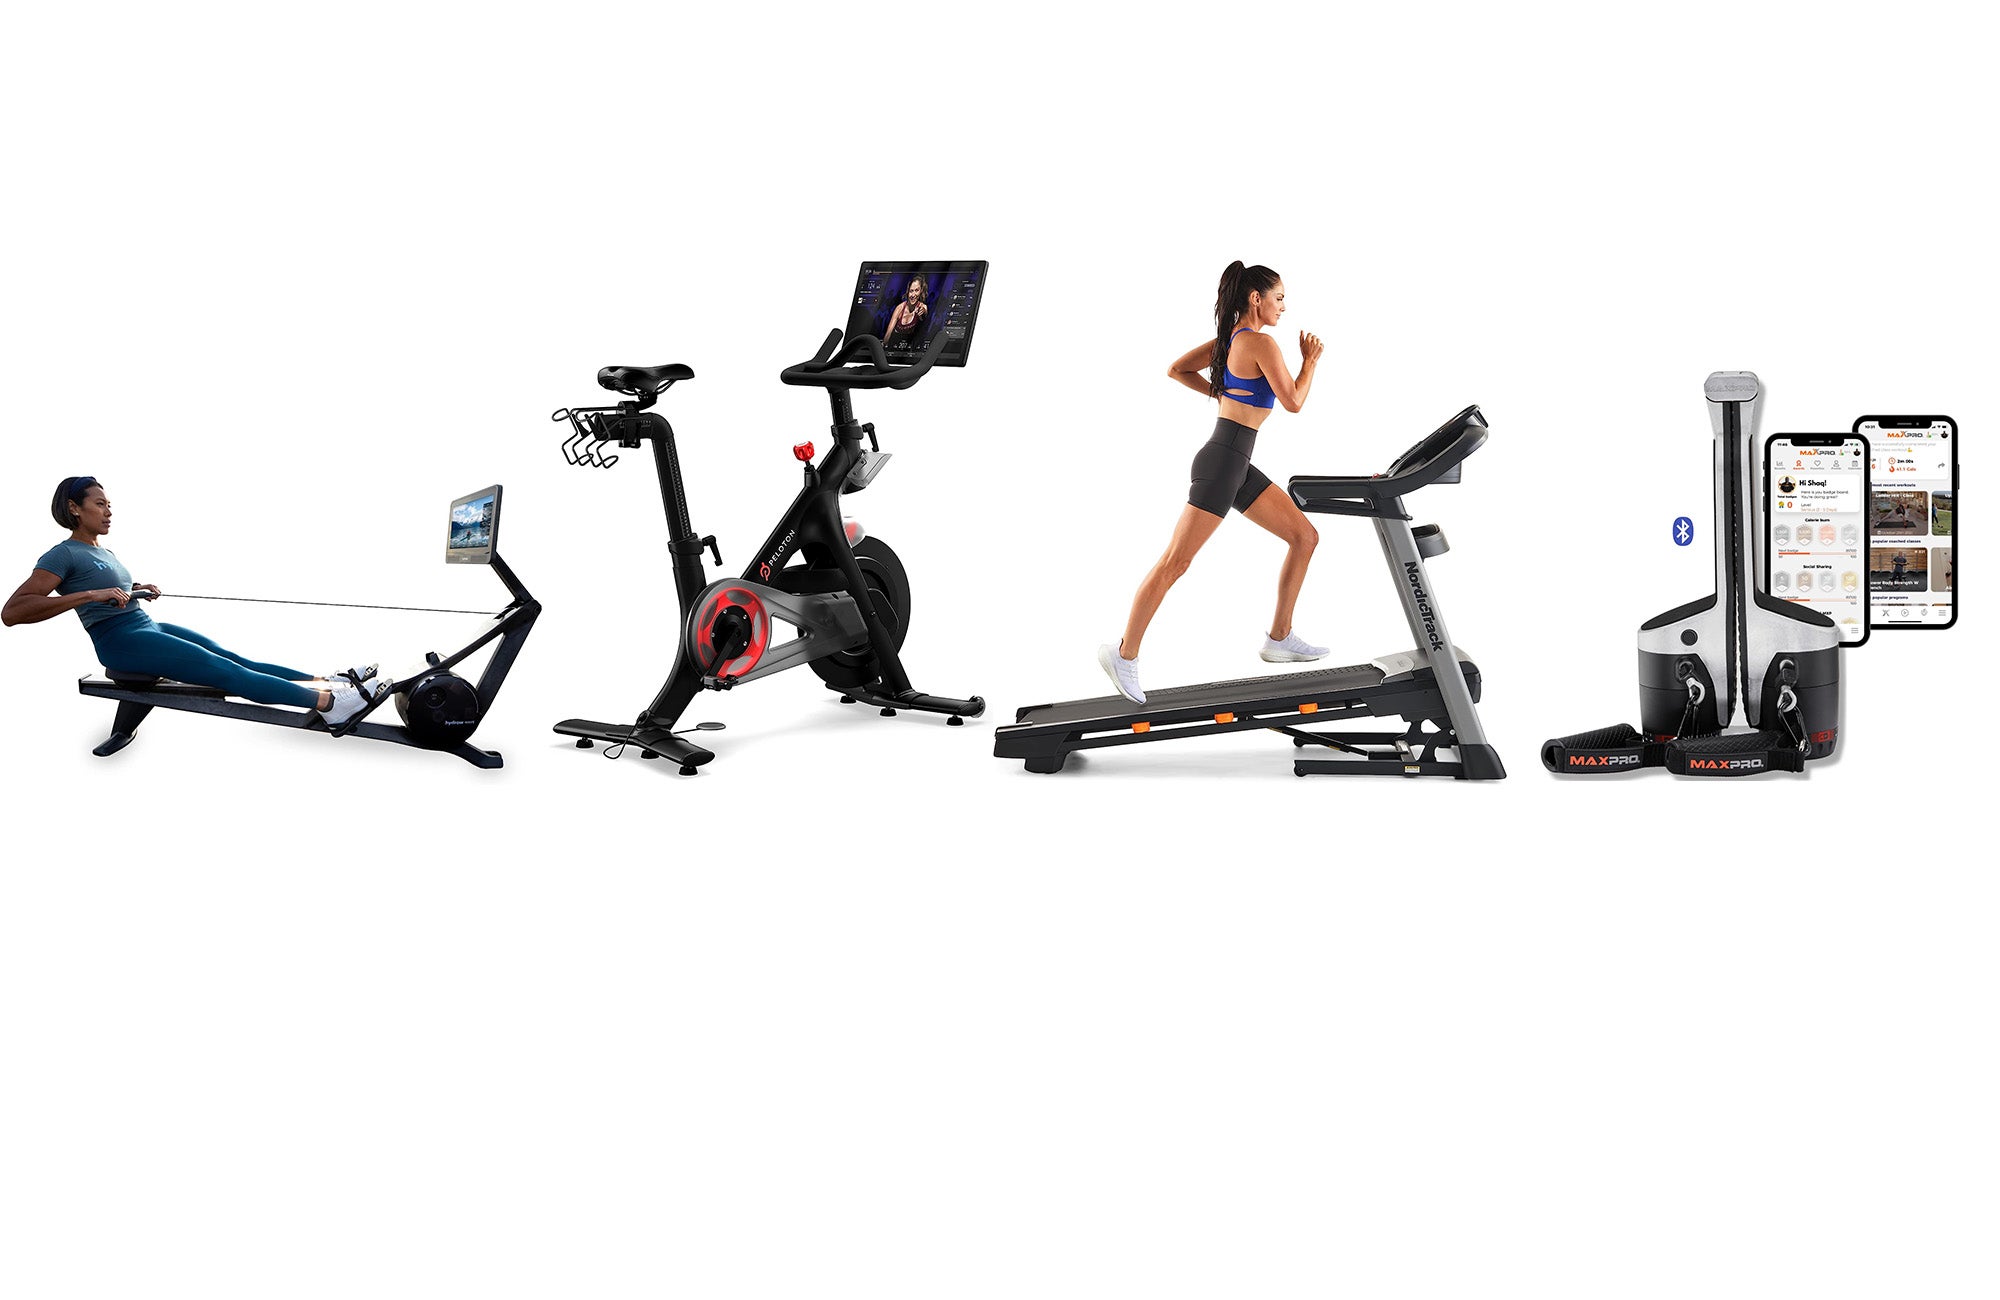 9 aesthetic workout equipment buys for a cute home gym